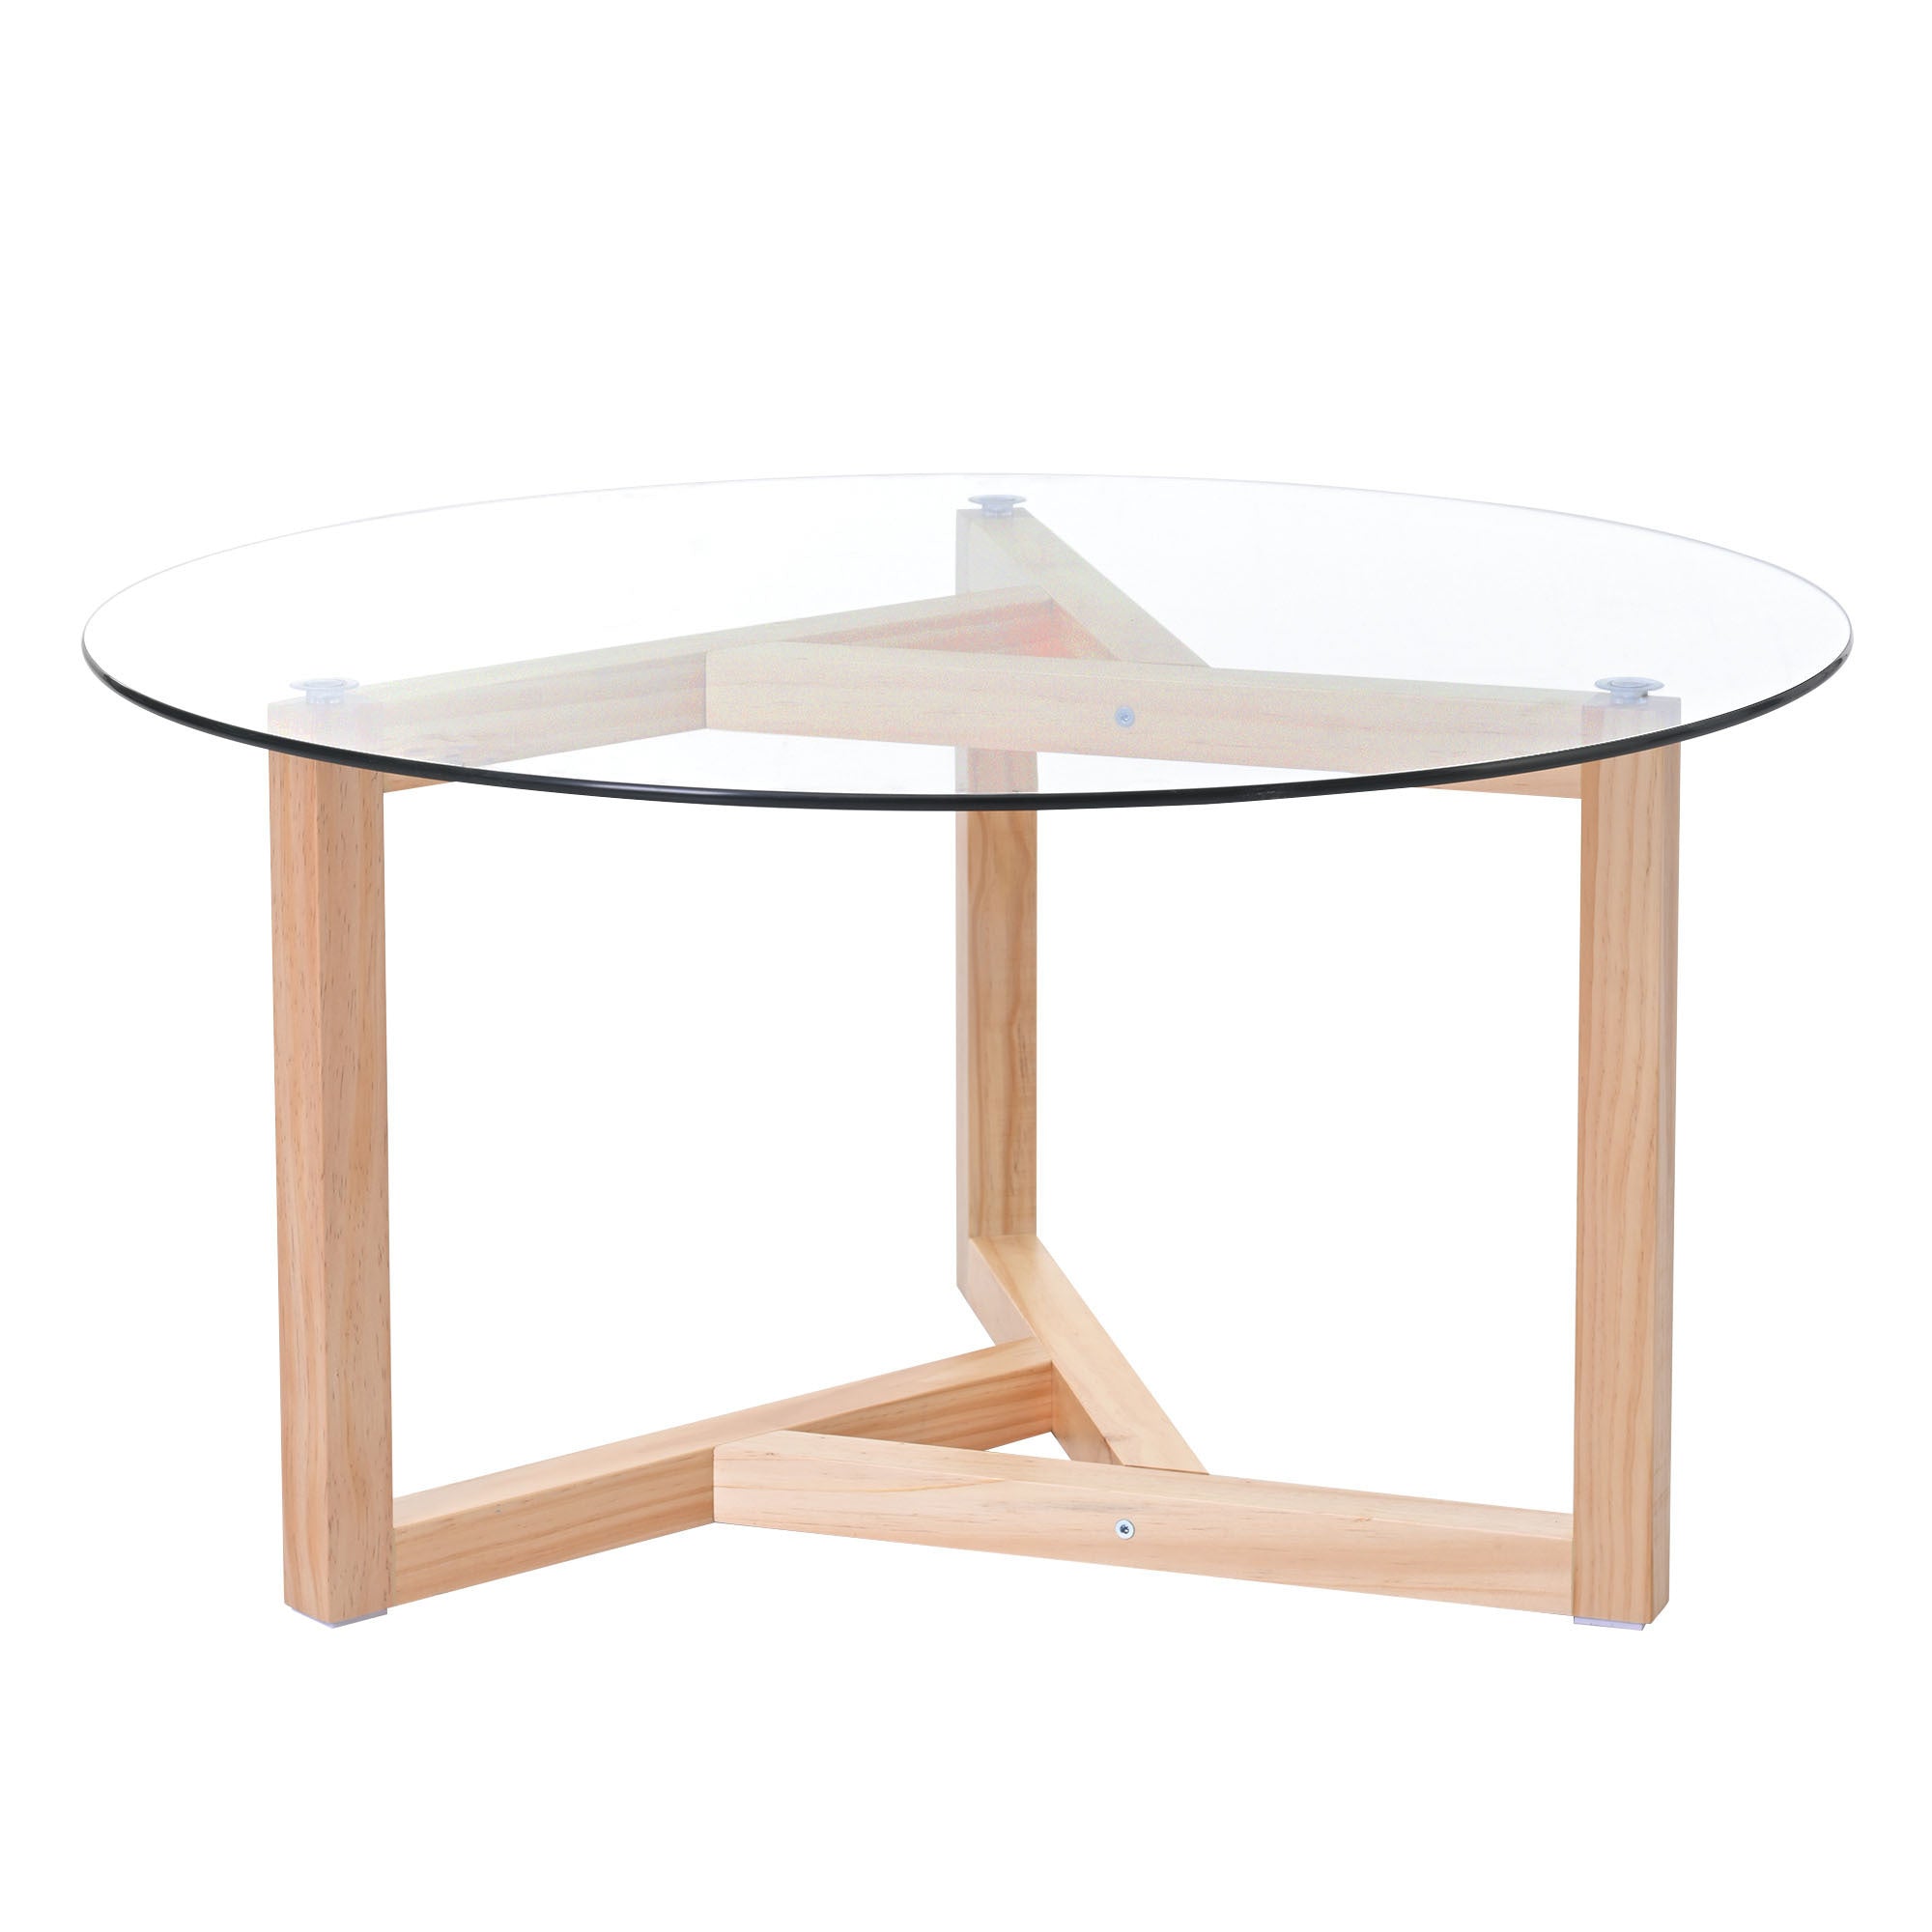 Round Modern Glass Coffee Table - Natural